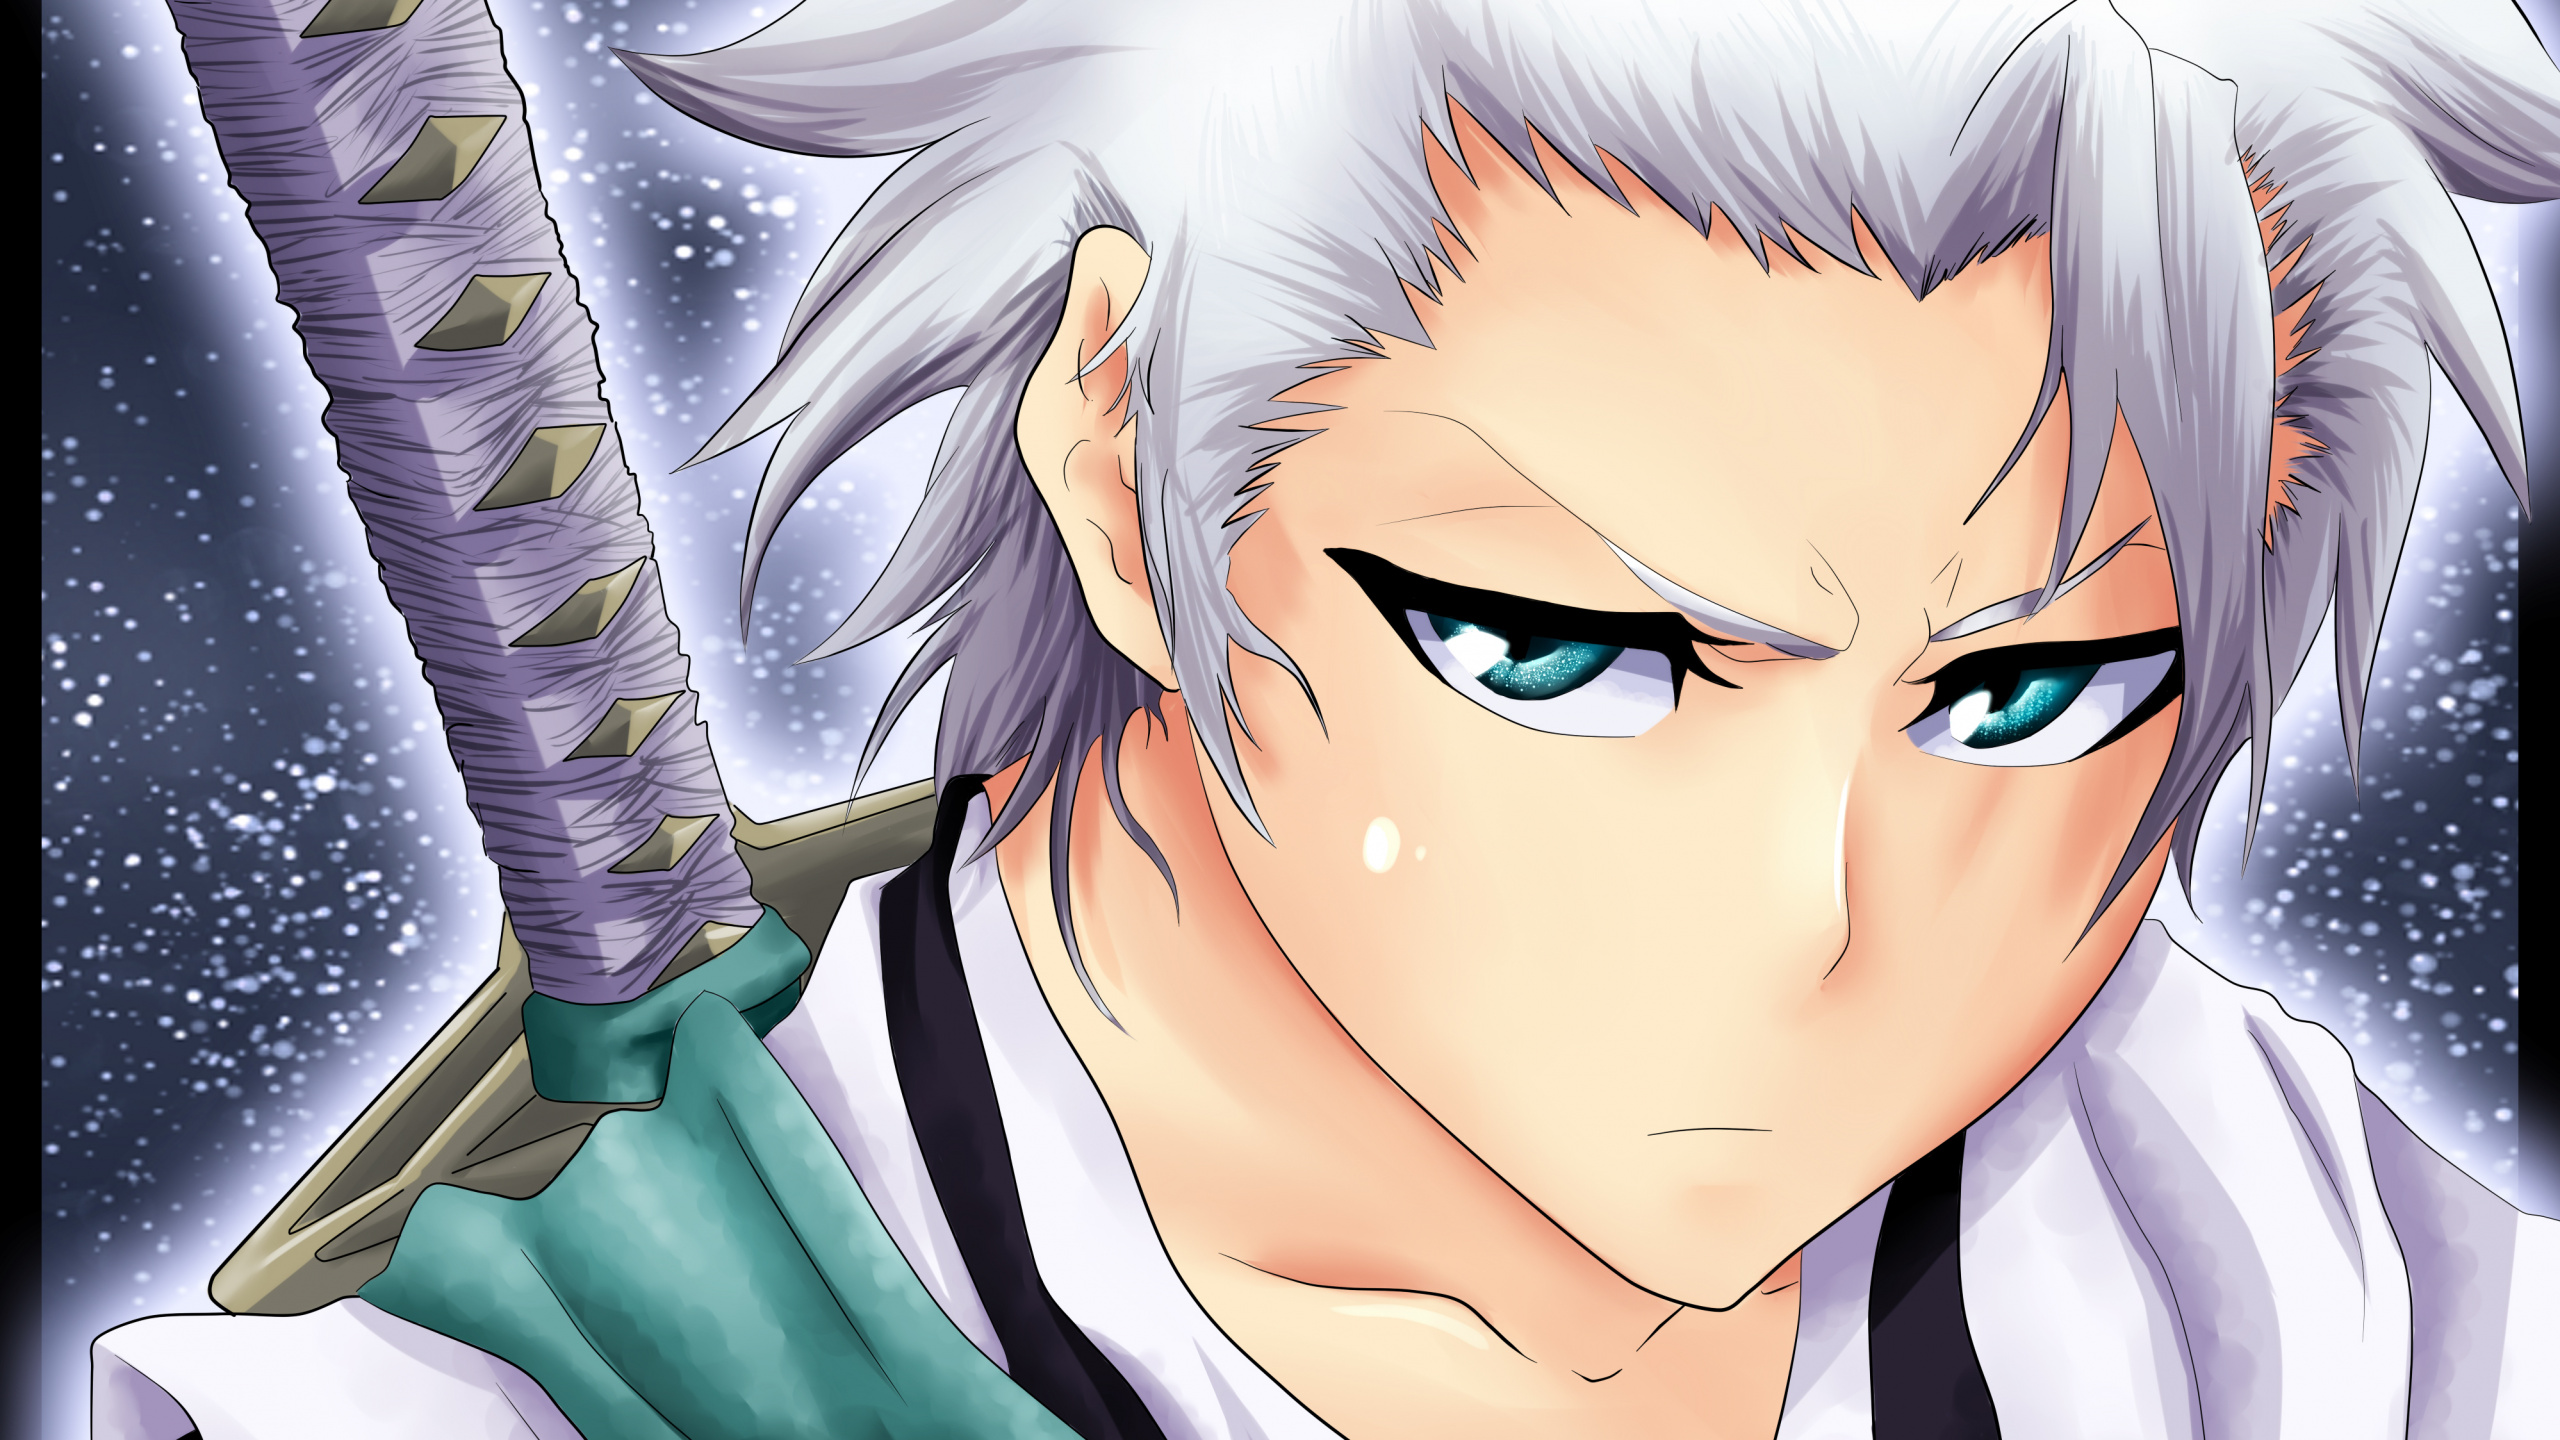 Personnage D'anime Masculin Aux Cheveux Bruns. Wallpaper in 2560x1440 Resolution